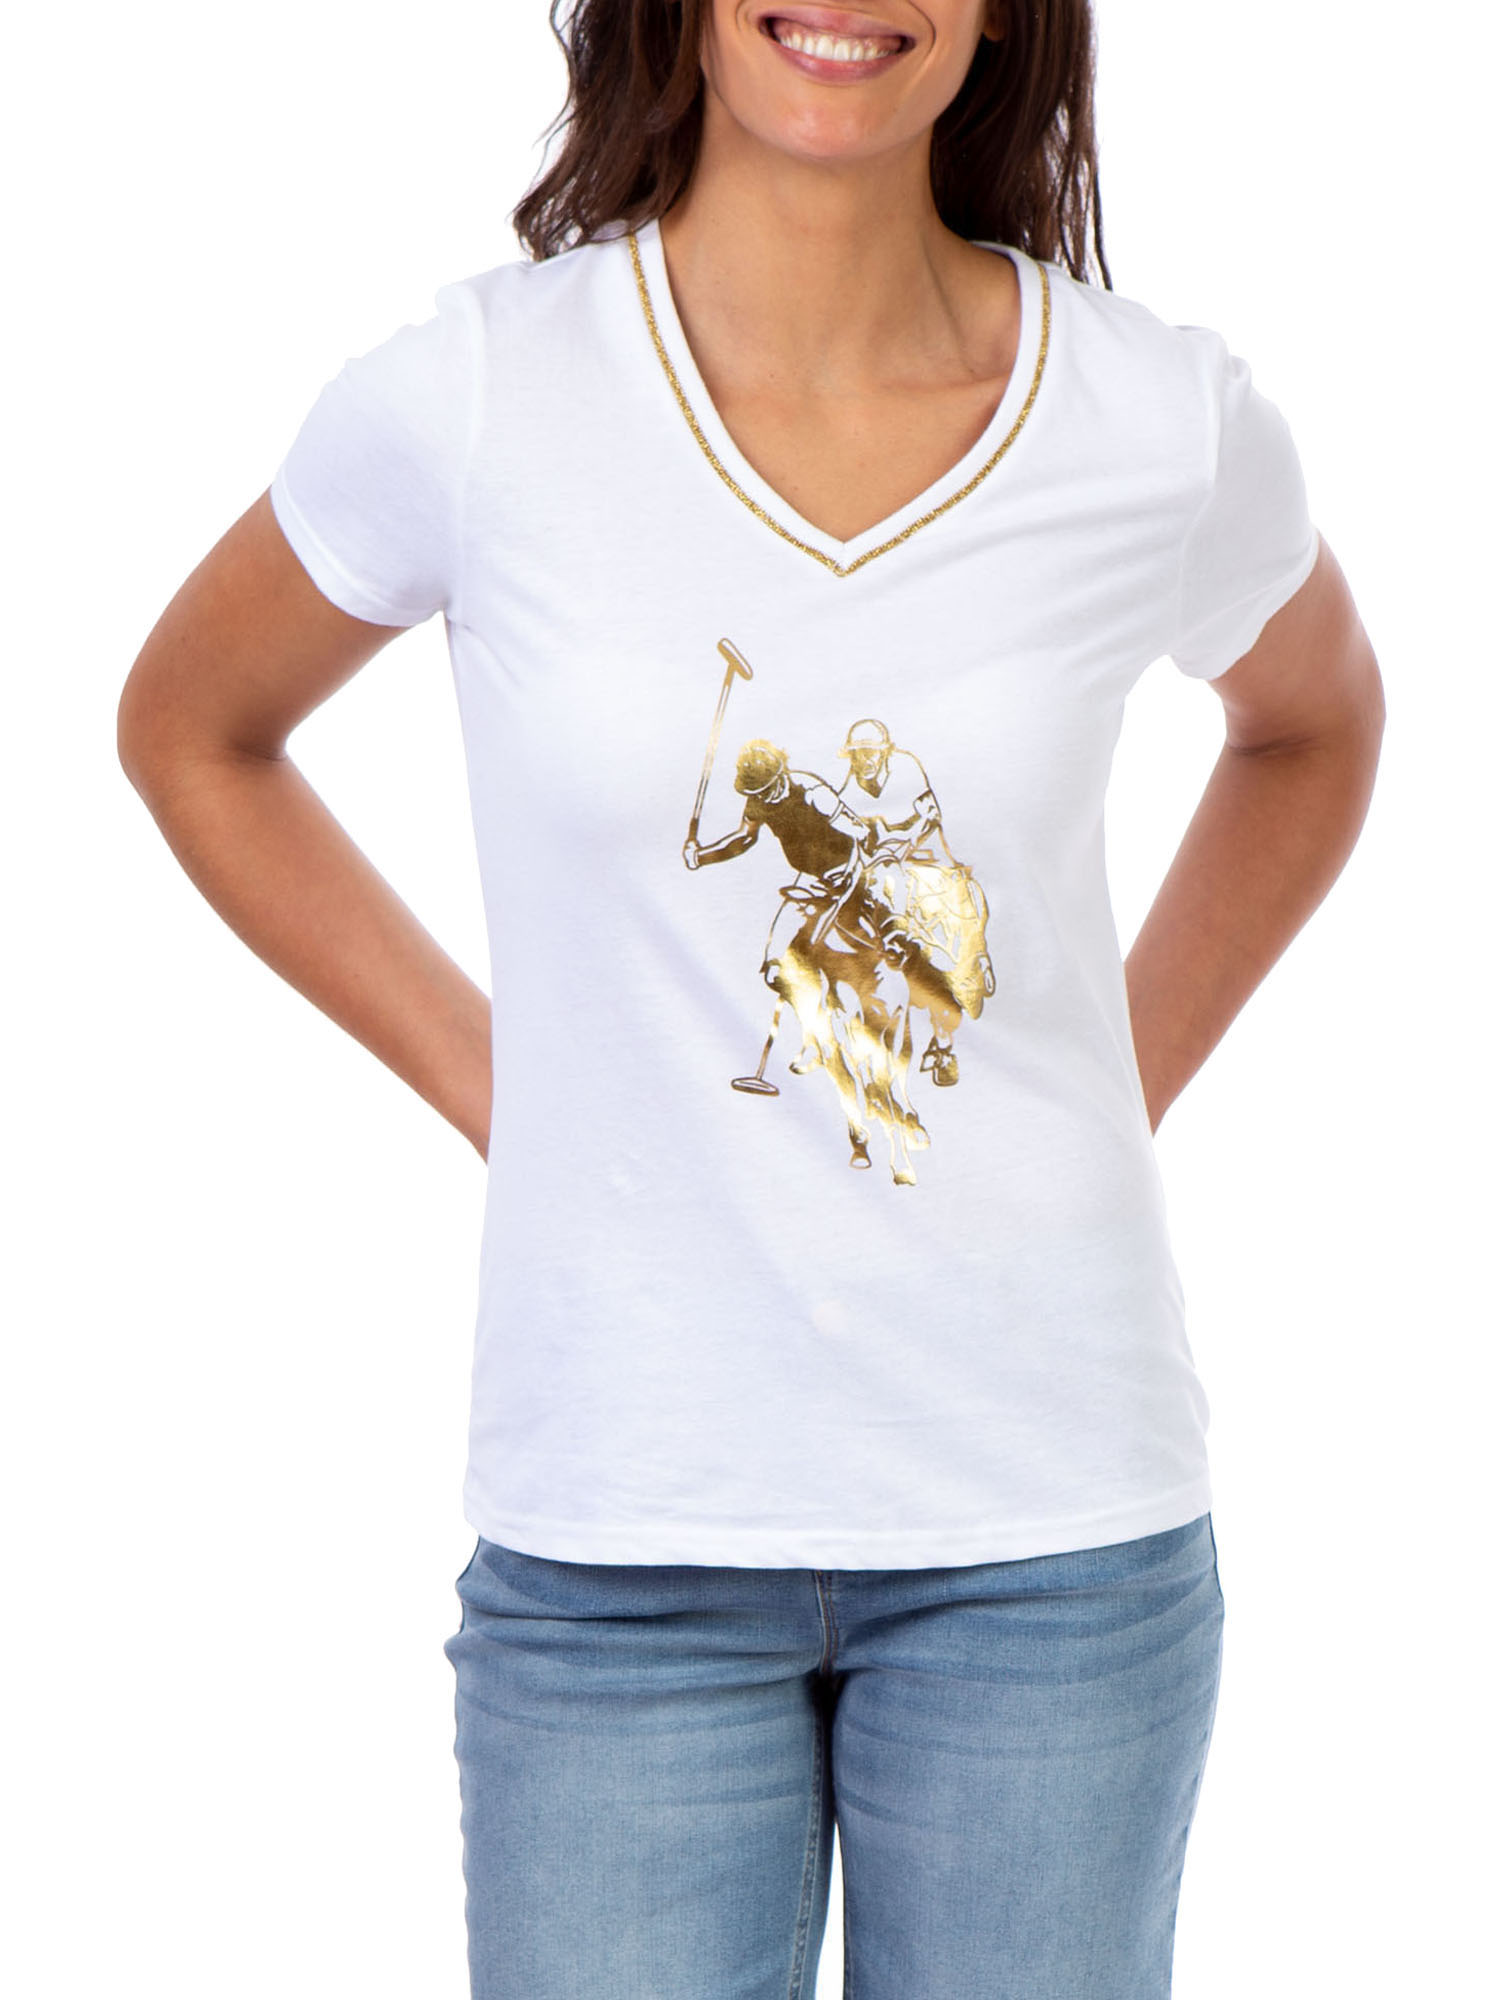 US Polo Assn. Short Sleeve Graphic V-Neck T-Shirt (Women's) 1 Pack - image 1 of 2